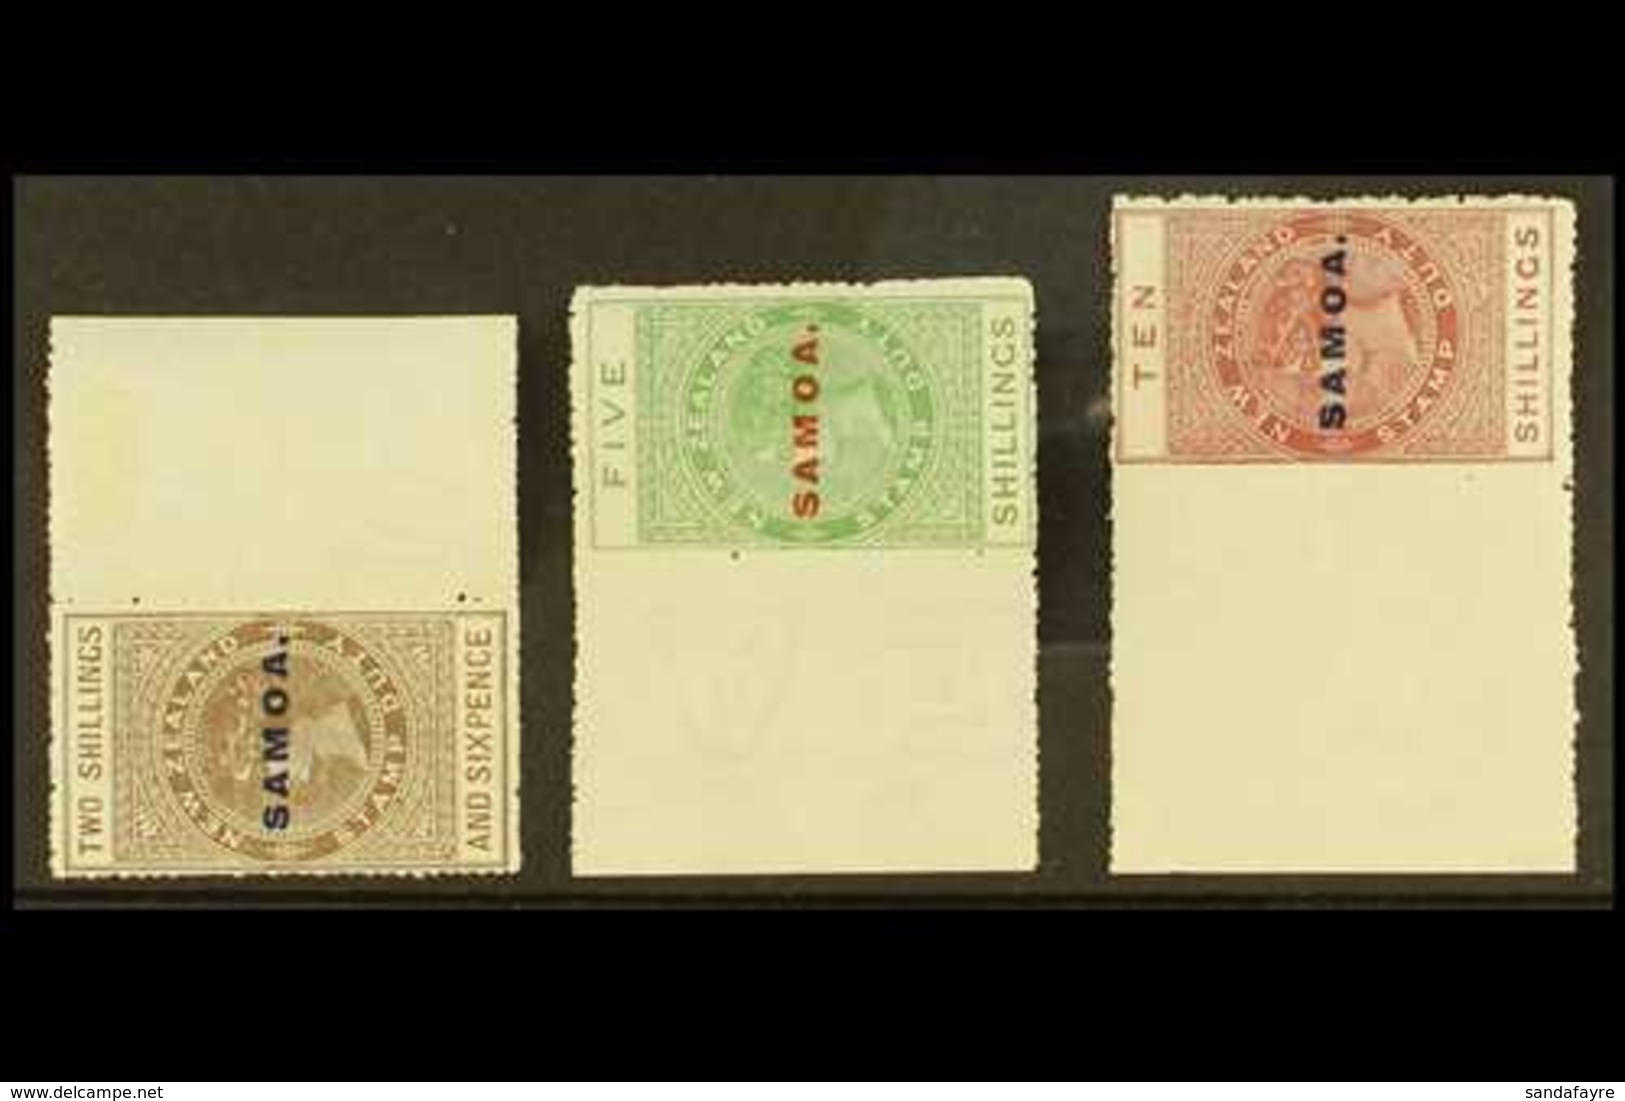 1914-24  2s6d, 5s, And 10s, Perf 14, Overprints On Postal Fiscals, SG 123/125, Each As Mint Marginals. (3 Stamps) For Mo - Samoa (Staat)